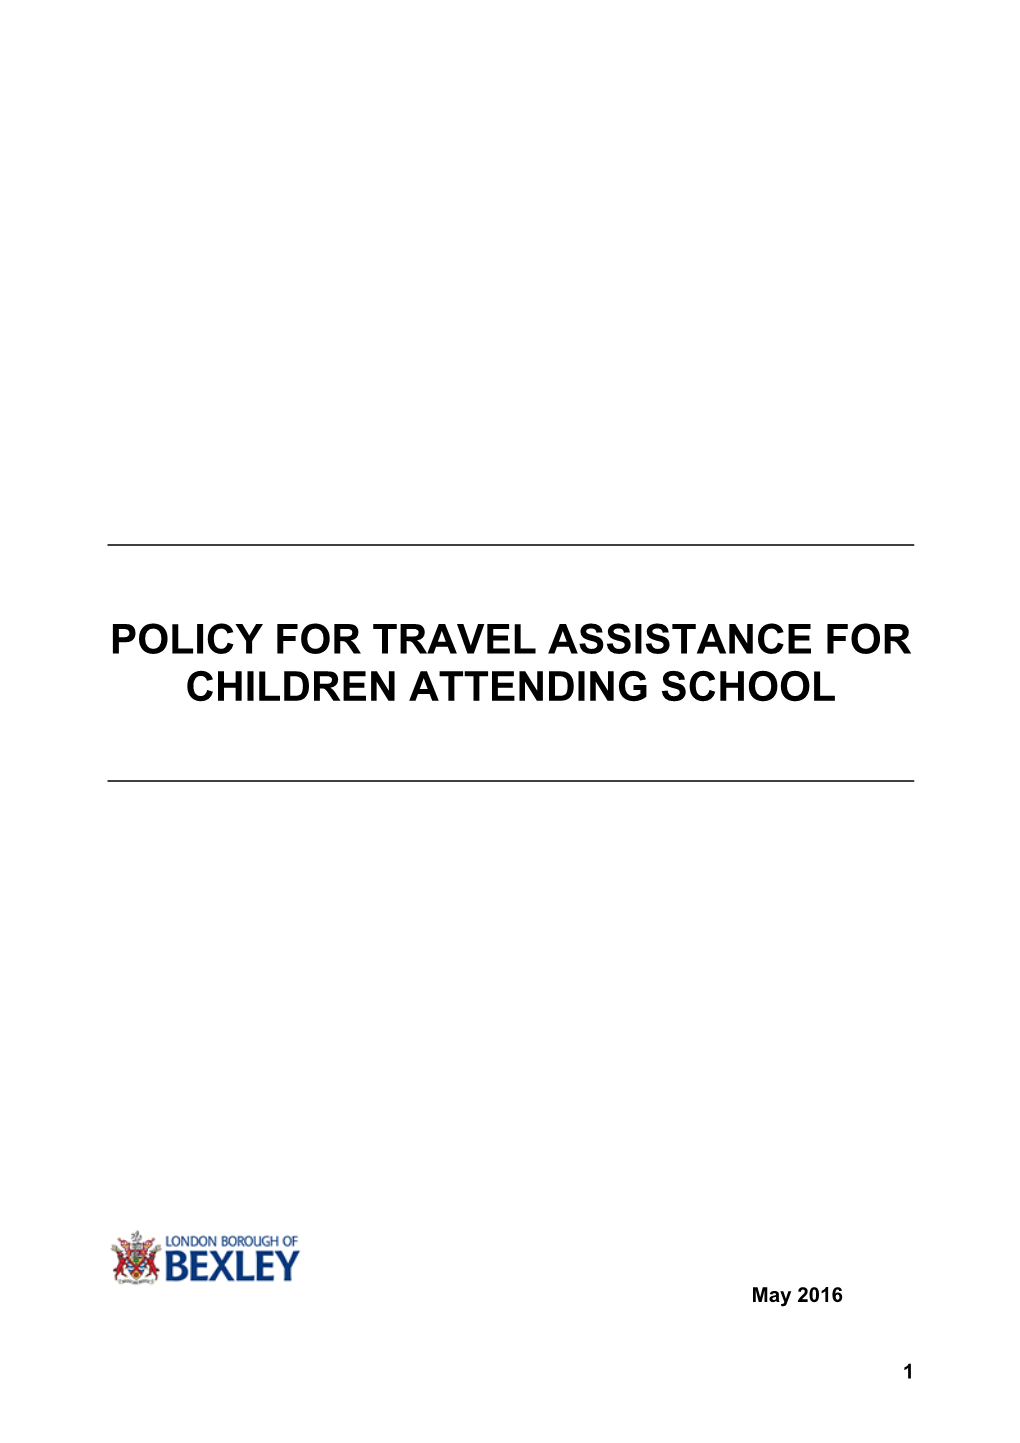 Policy for Travel Assistance for Children and Young People Attending School Or College